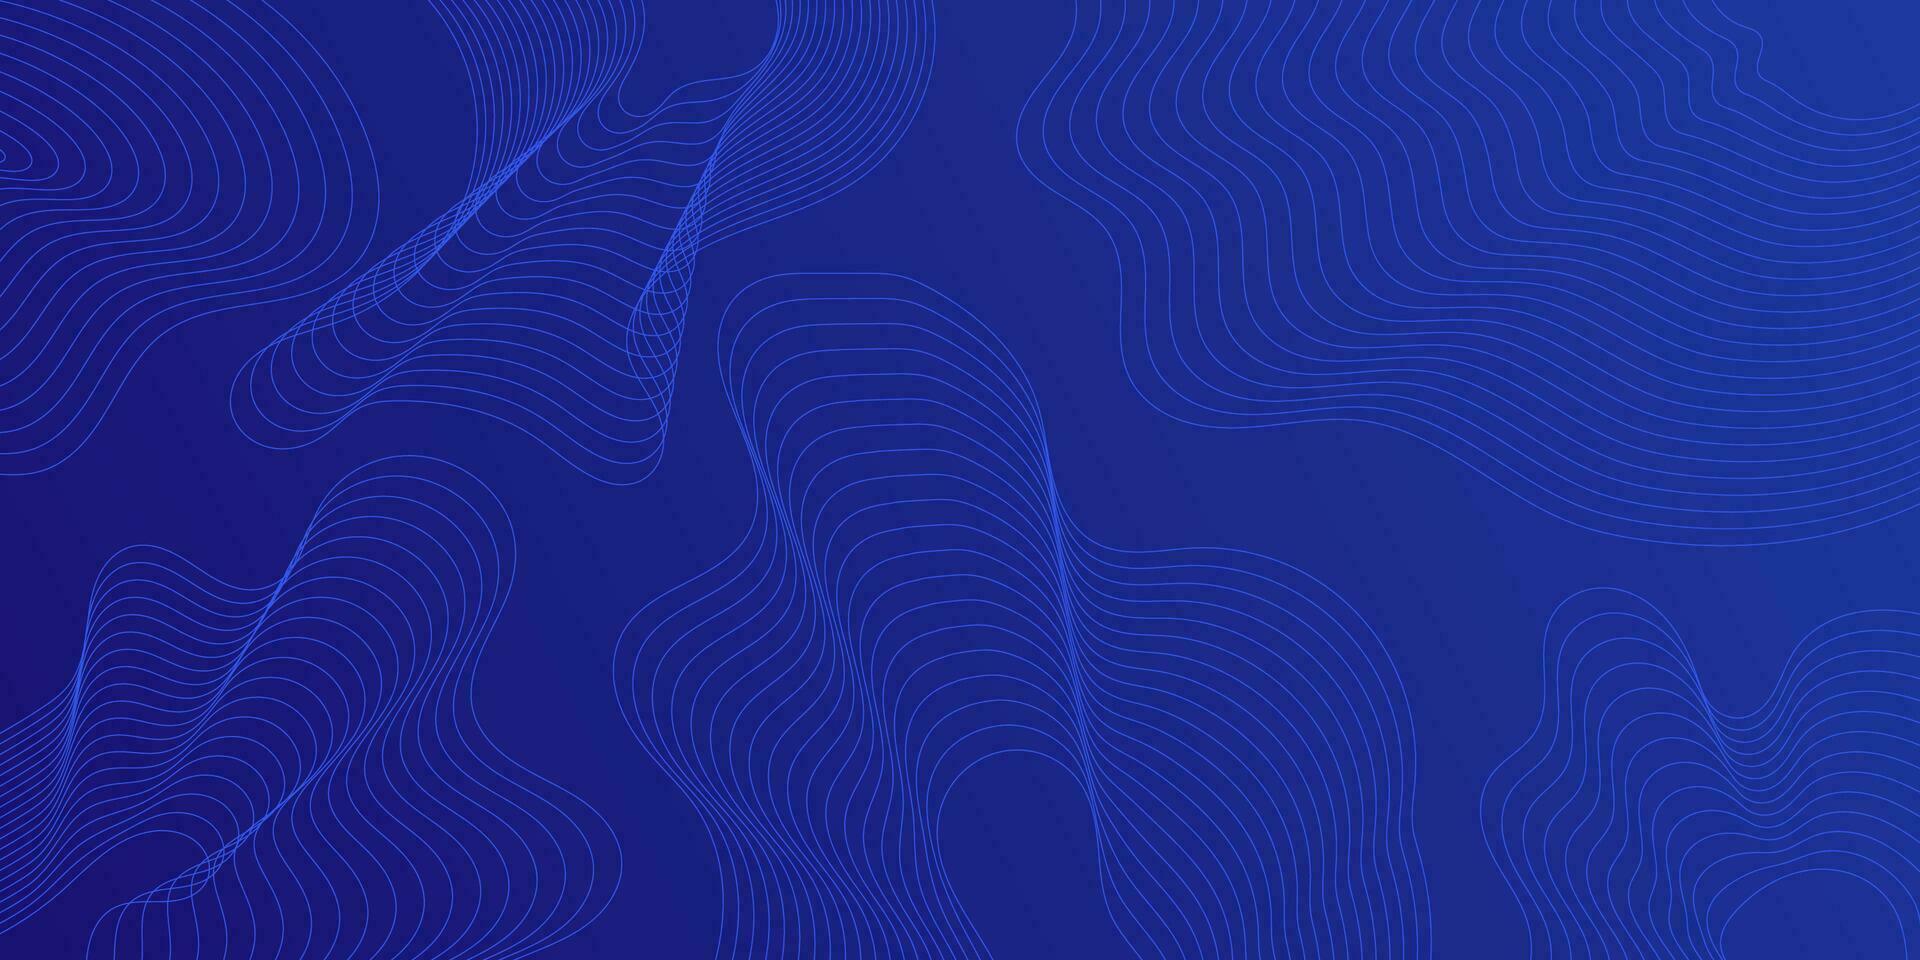 abstract blue wavy background with lines vector